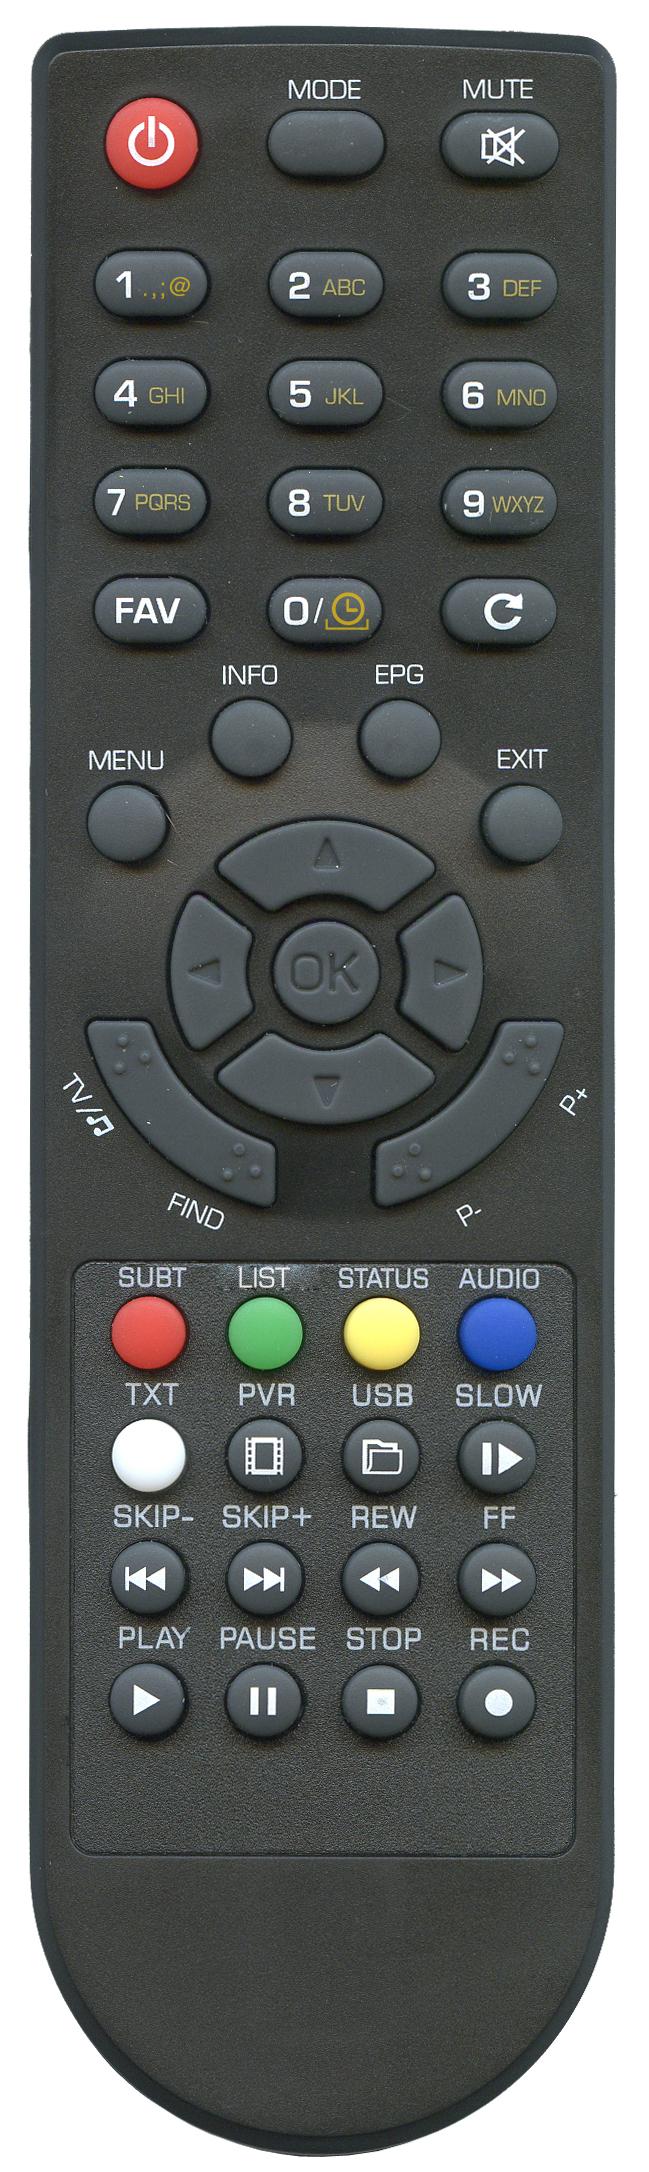 Remote controller Button POWER MODE MUTE Numeric buttons FAV LAST MENU Function Switch receiver on from standby mode. Switch display mode of receiver. Enable or disable the audio. Select channel.